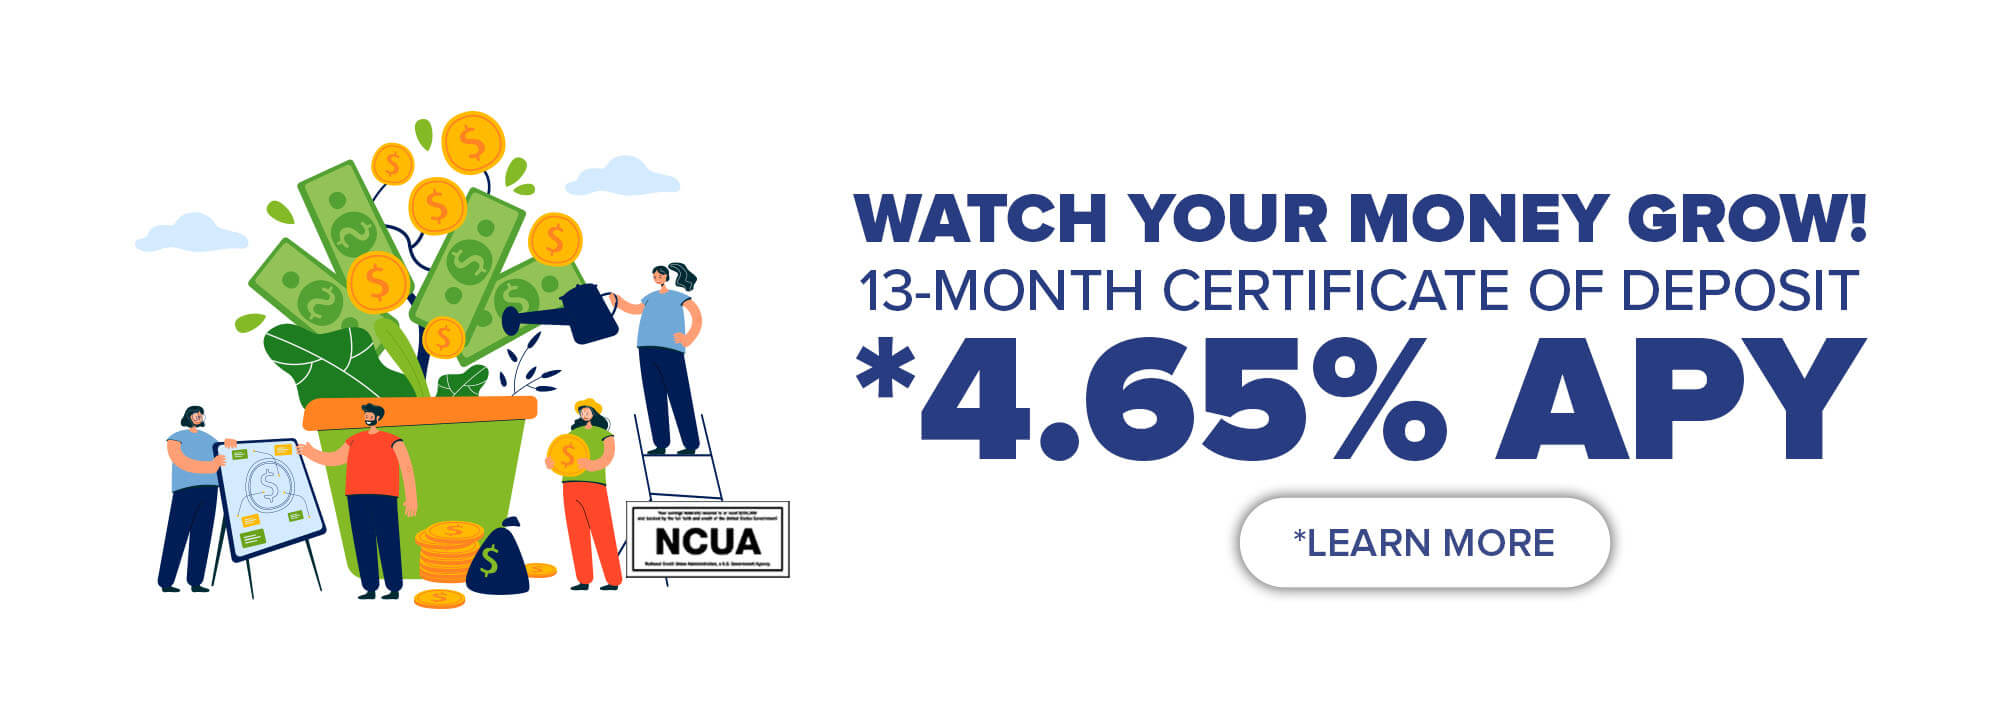 Watch your money grow! 13-month certificate of deposit. *4.65% APY. *Learn More